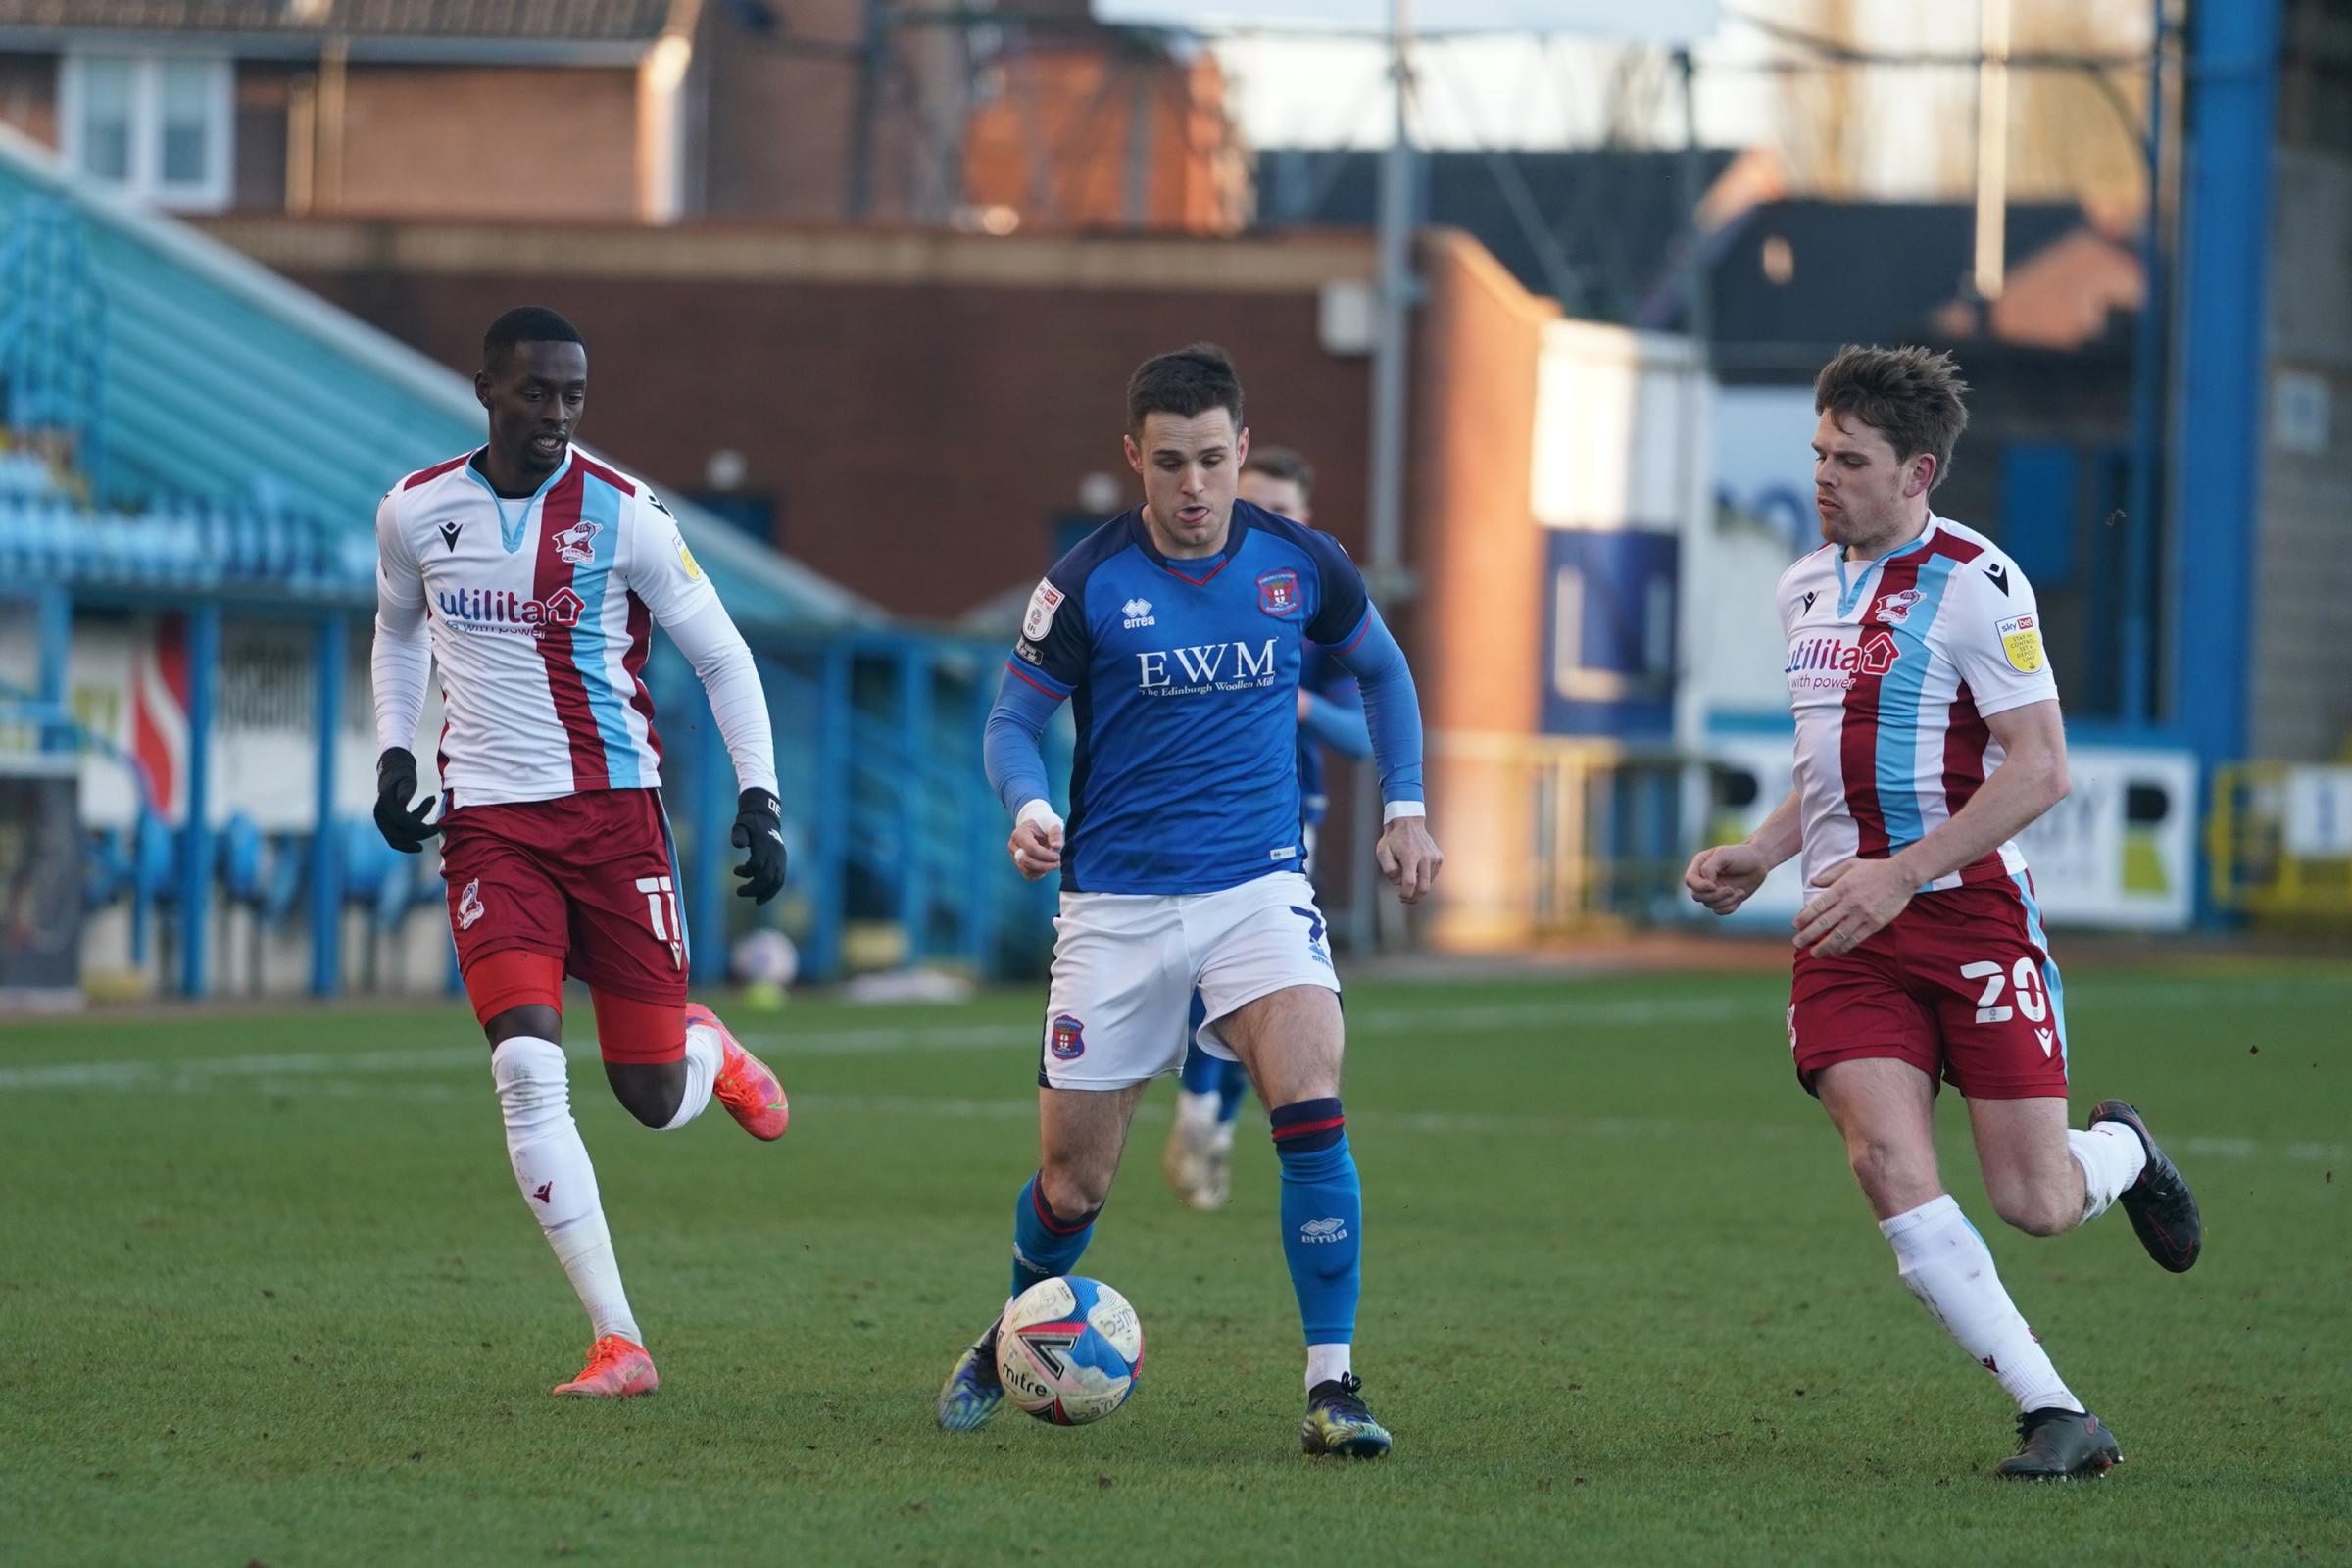 SQUEEZED: Joe Riley comes under pressure on the ball for Carlisle in the first half